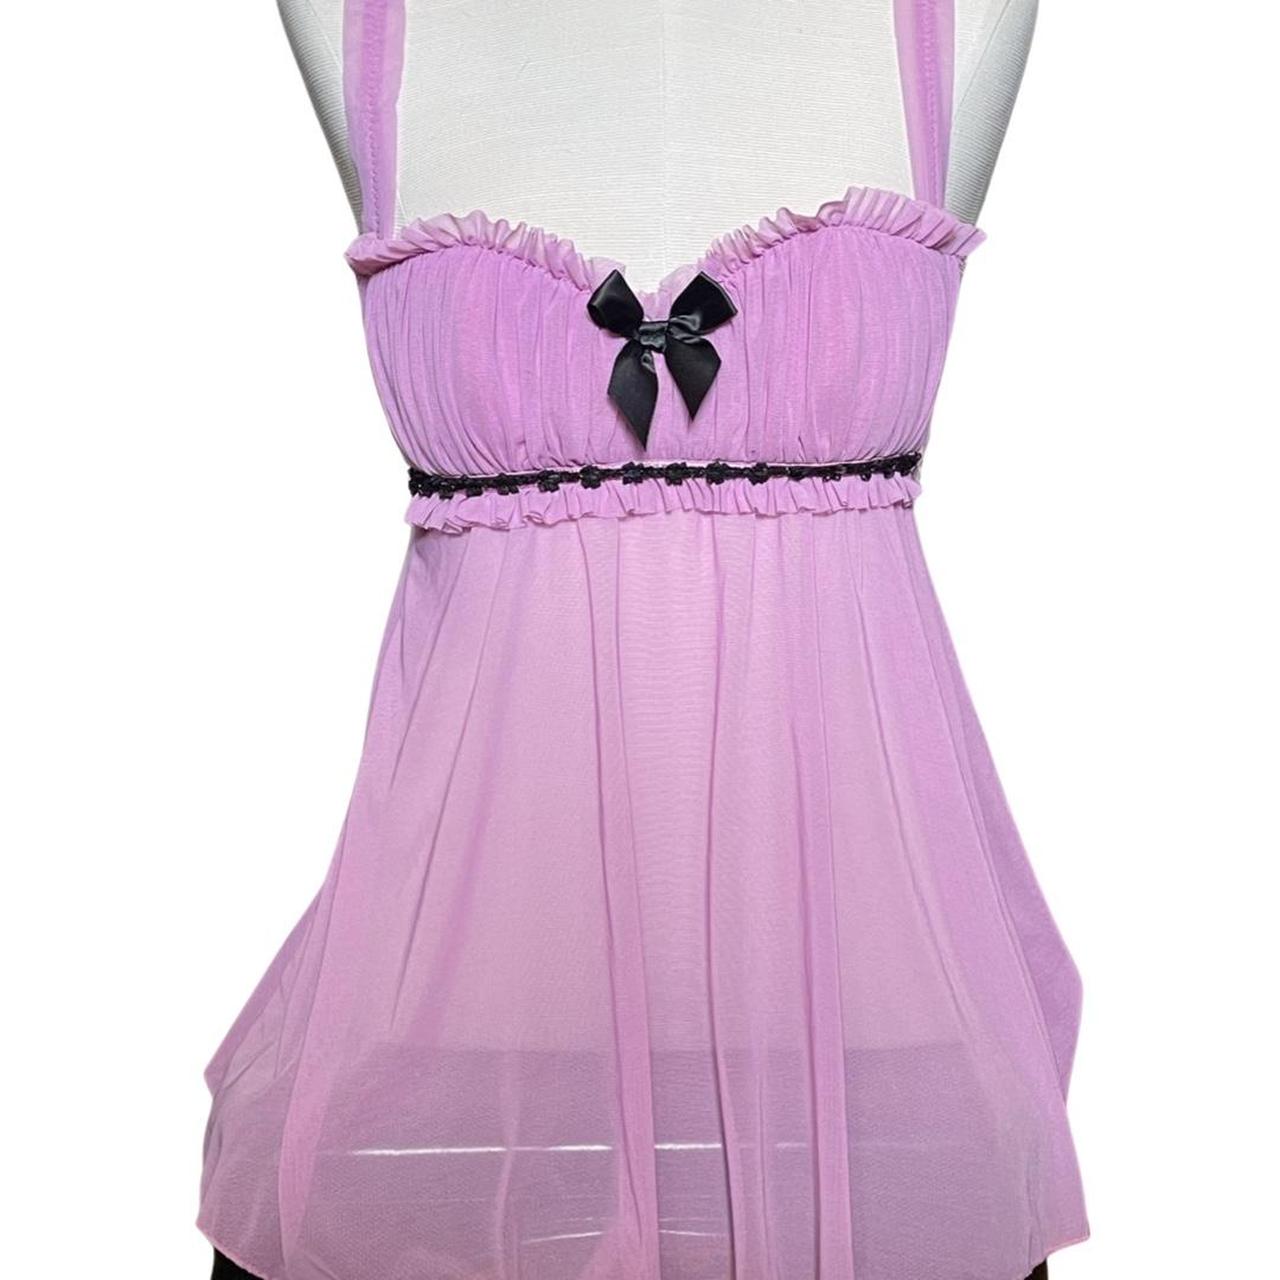 Frederick's of Hollywood Women's Pink and Black Nightwear